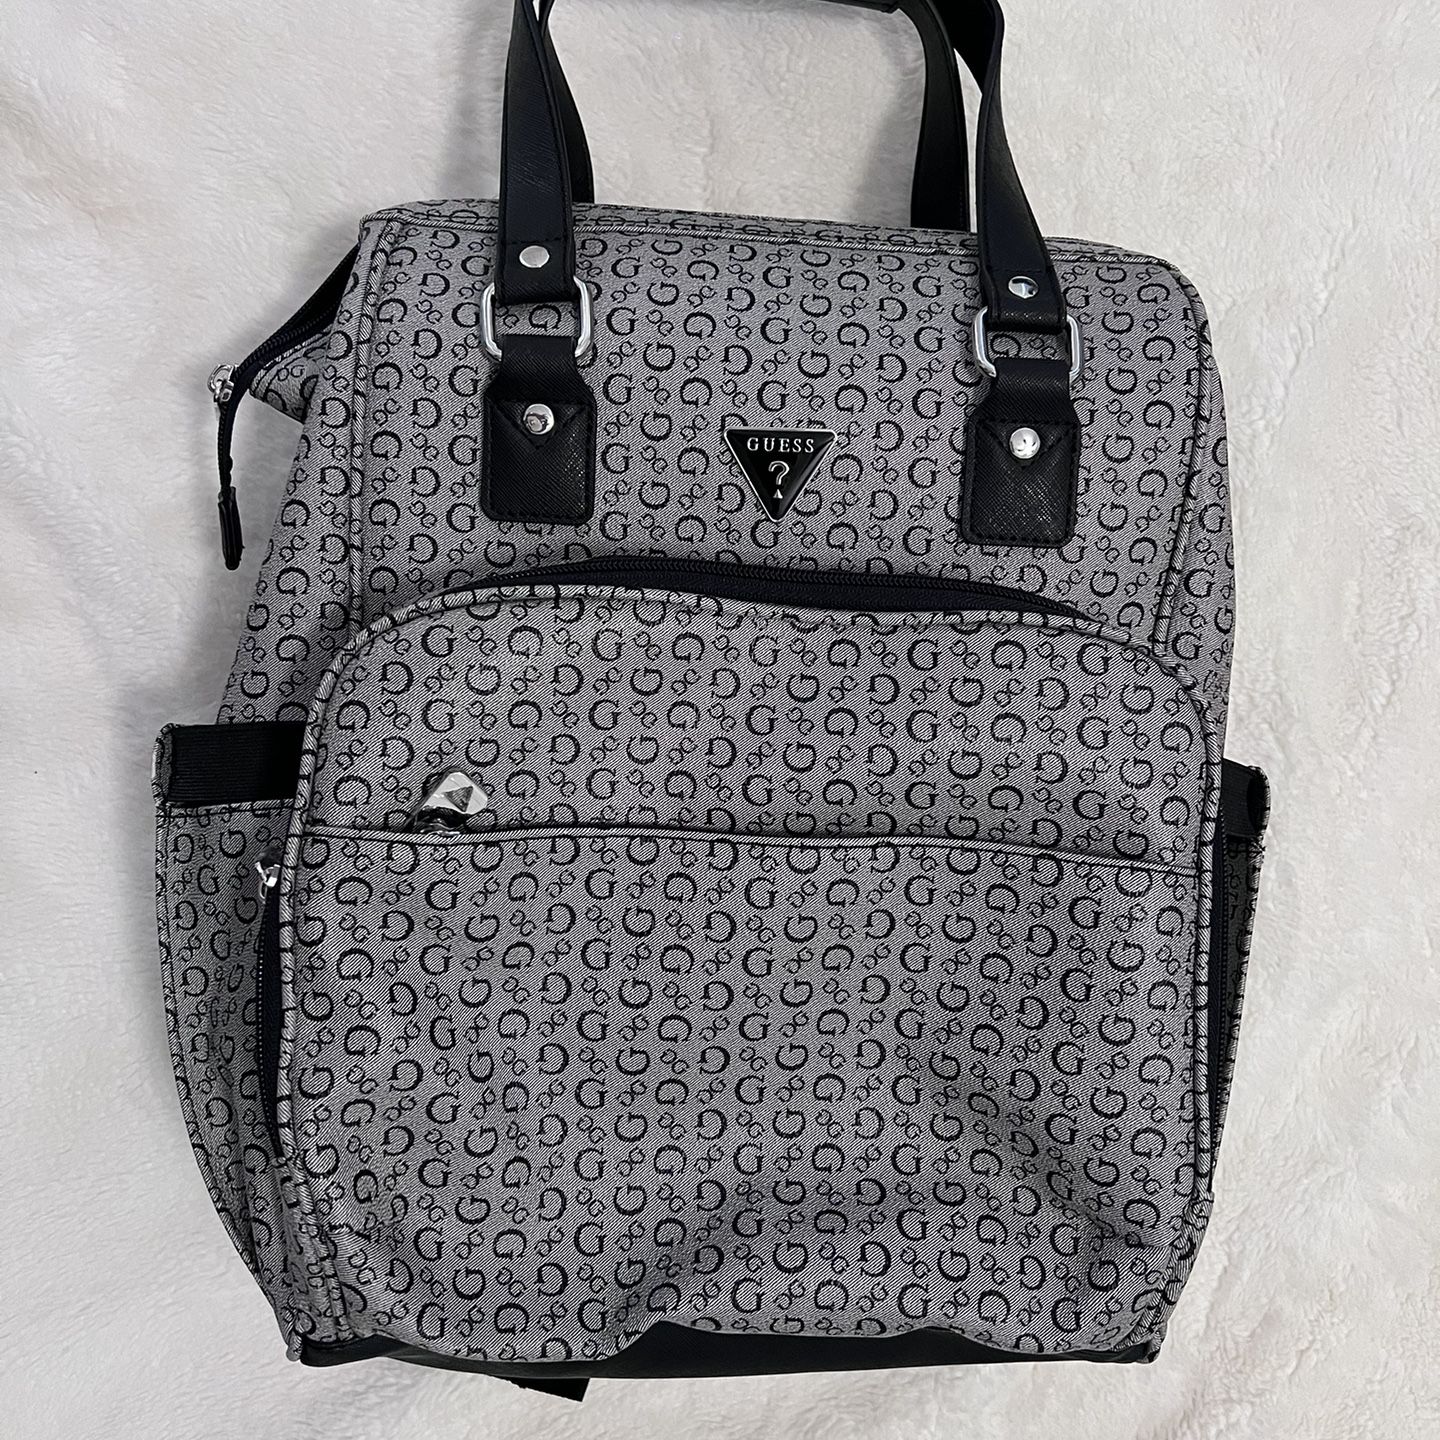 Guess Diaper Bag/backpack for Sale in El Monte, CA - OfferUp